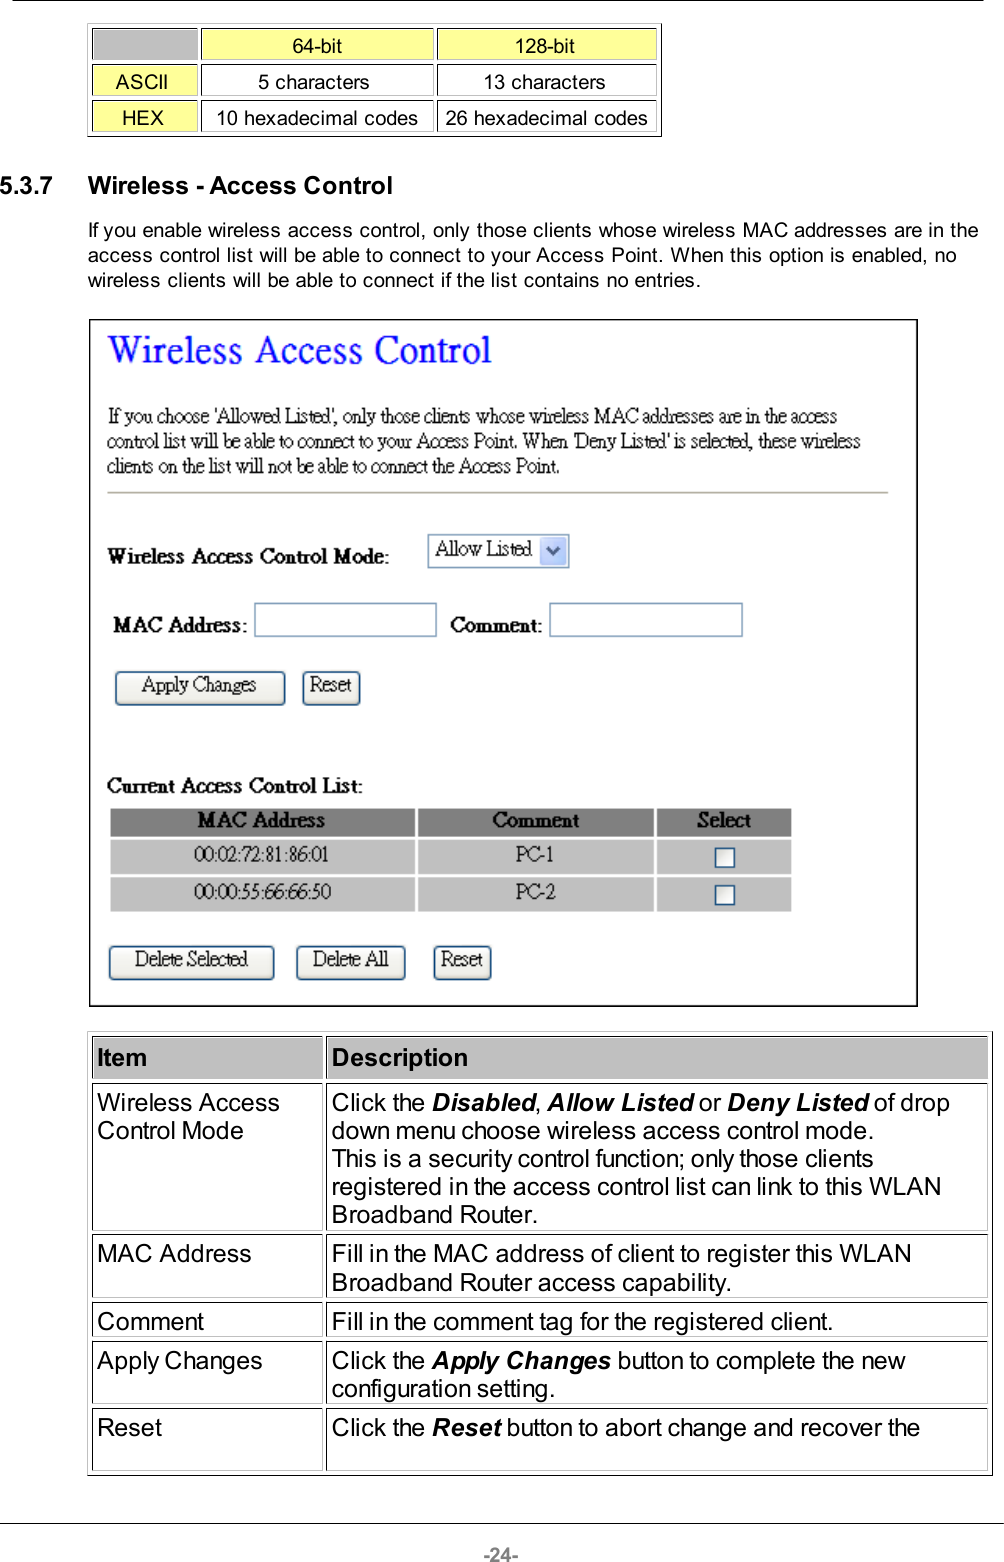 -24-64-bit128-bit ASCII 5 characters 13 characters HEX 10 hexadecimal codes26 hexadecimal codes5.3.7 Wireless - Access ControlIf you enable wireless access control, only those clients whose wireless MAC addresses are in theaccess control list will be able to connect to your Access Point. When this option is enabled, nowireless clients will be able to connect if the list contains no entries.ItemDescriptionWireless AccessControl ModeClick the Disabled, Allow Listed or Deny Listed of dropdown menu choose wireless access control mode. This is a security control function; only those clientsregistered in the access control list can link to this WLANBroadband Router.MAC AddressFill in the MAC address of client to register this WLANBroadband Router access capability.CommentFill in the comment tag for the registered client.Apply Changes Click the Apply Changes button to complete the newconfiguration setting.Reset Click the Reset button to abort change and recover the